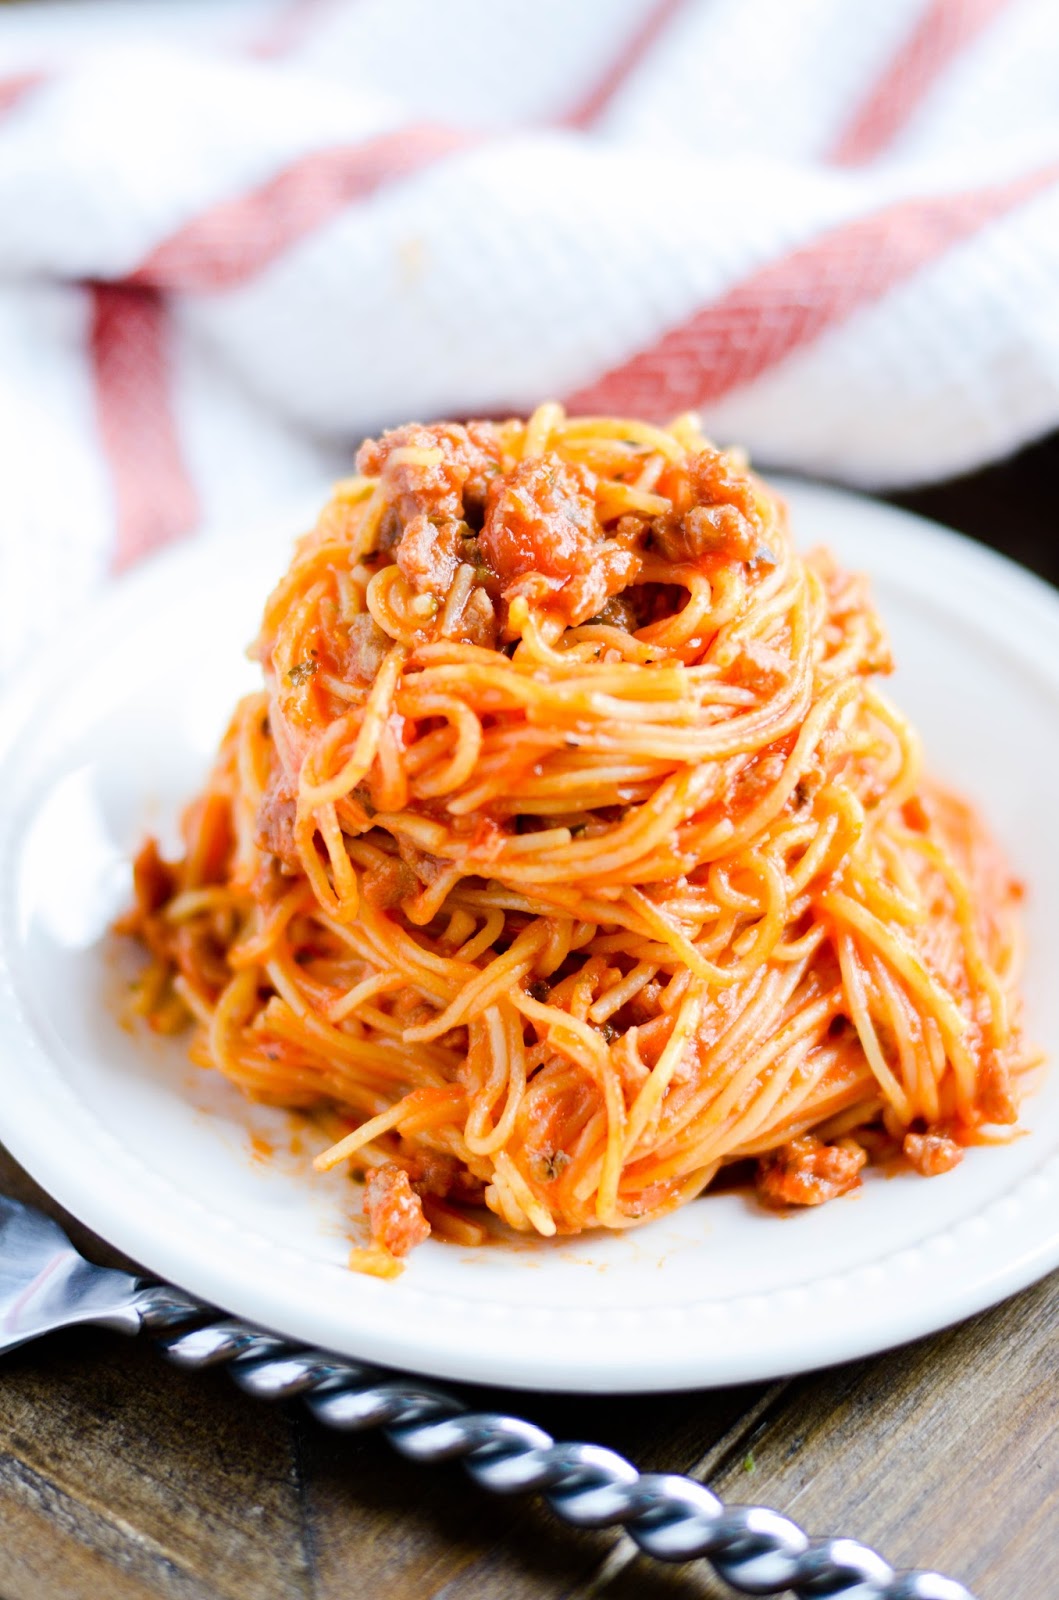 Weeknight dinner simplified: Instant Pot Spaghetti with flavorful meat sauce – a one-pot meal for busy families.